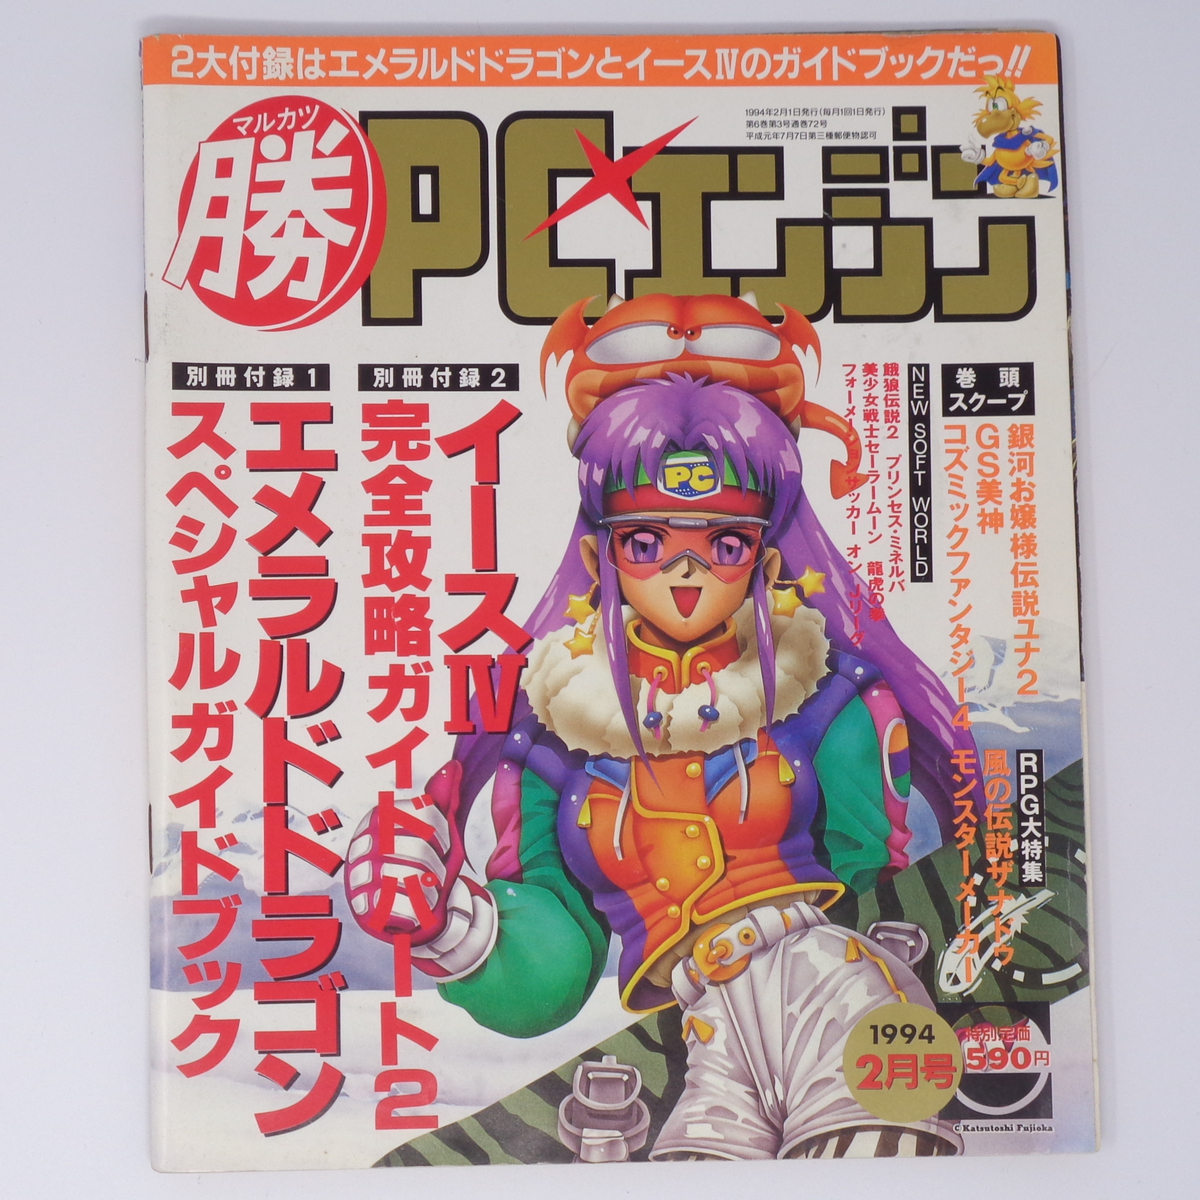  maru .ma LUKA tsuPC engine 1994 year 2 month number separate volume appendix less / Milky Way lady`s legend yuna2/ Monstar Manufacturers / game magazine [Free Shipping]